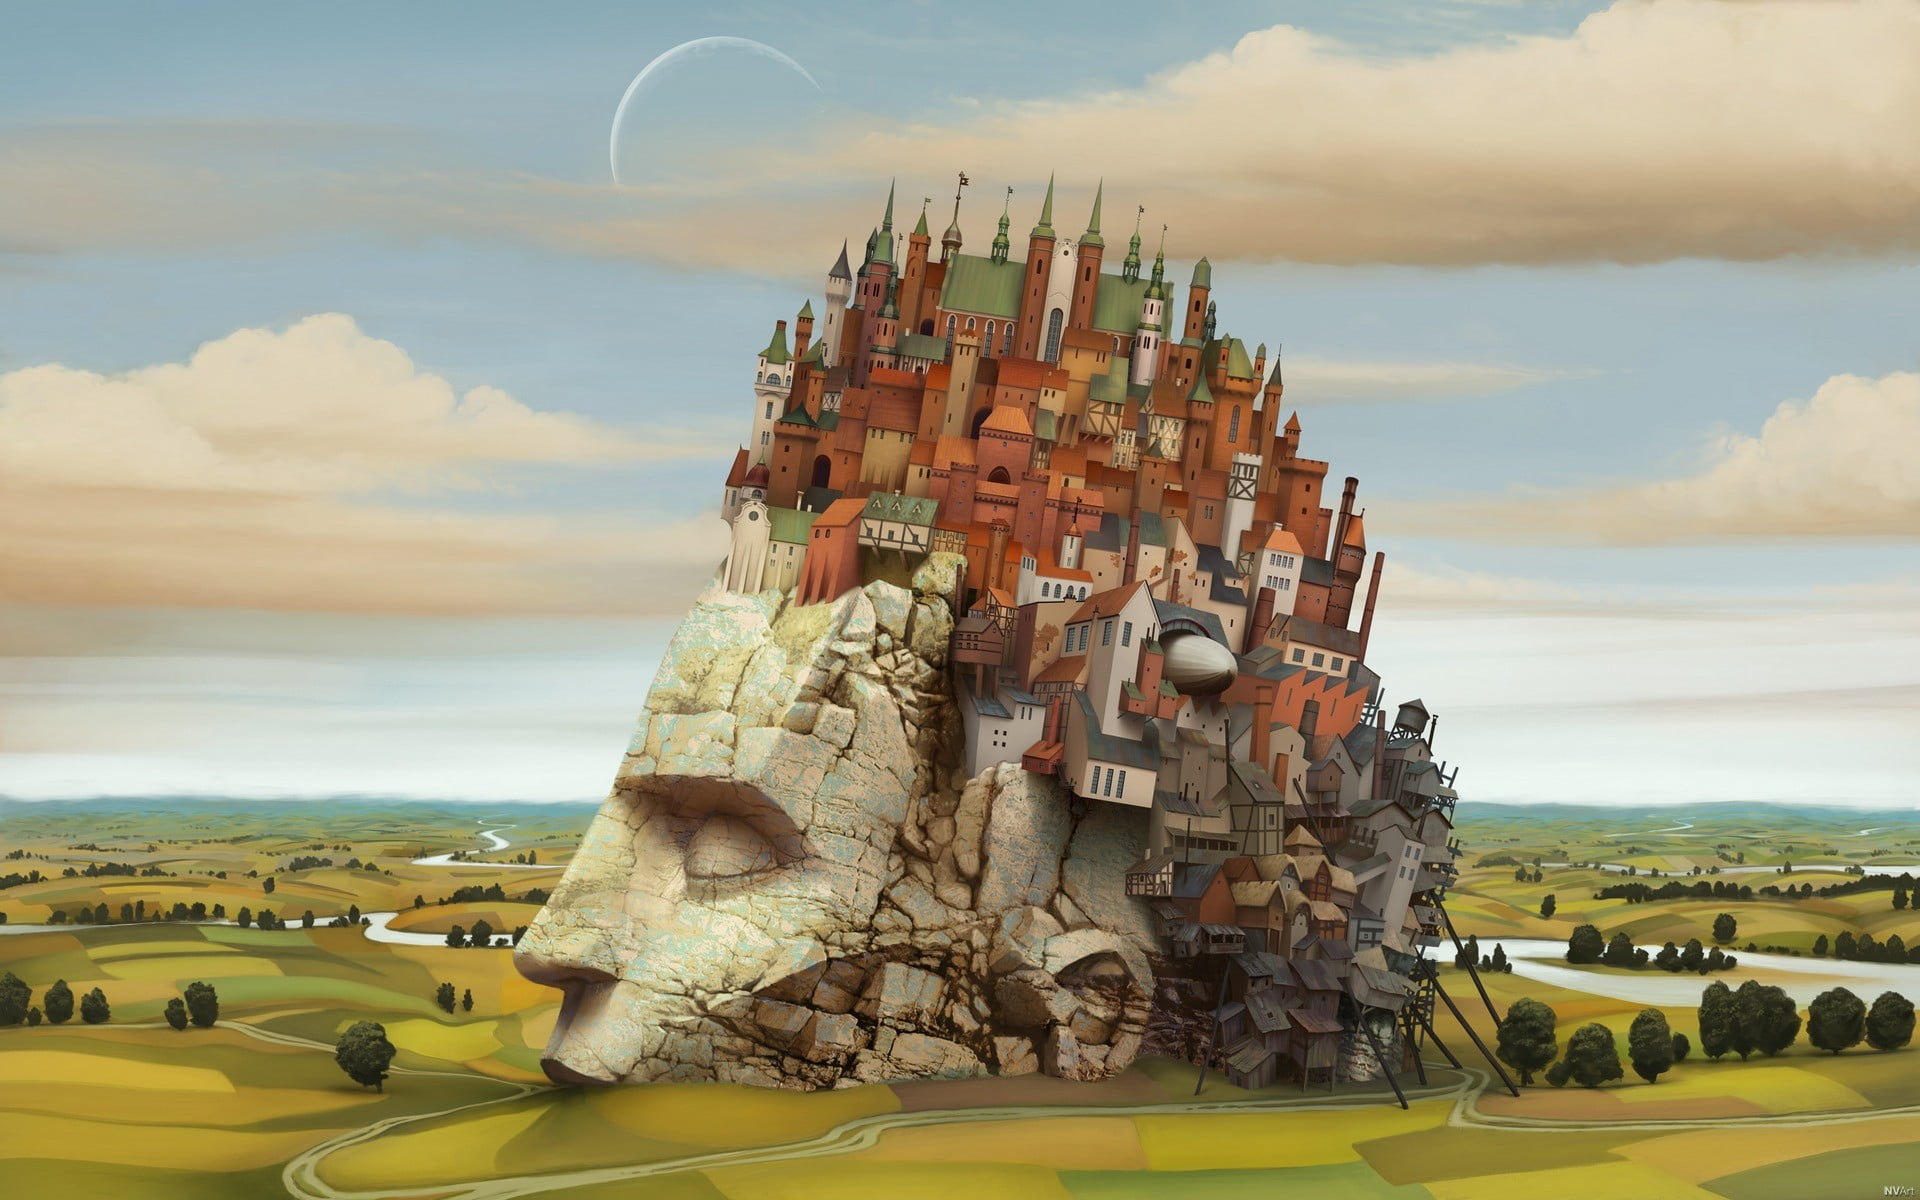 multicolored human head with houses illustration, artwork, surreal, castle, statue